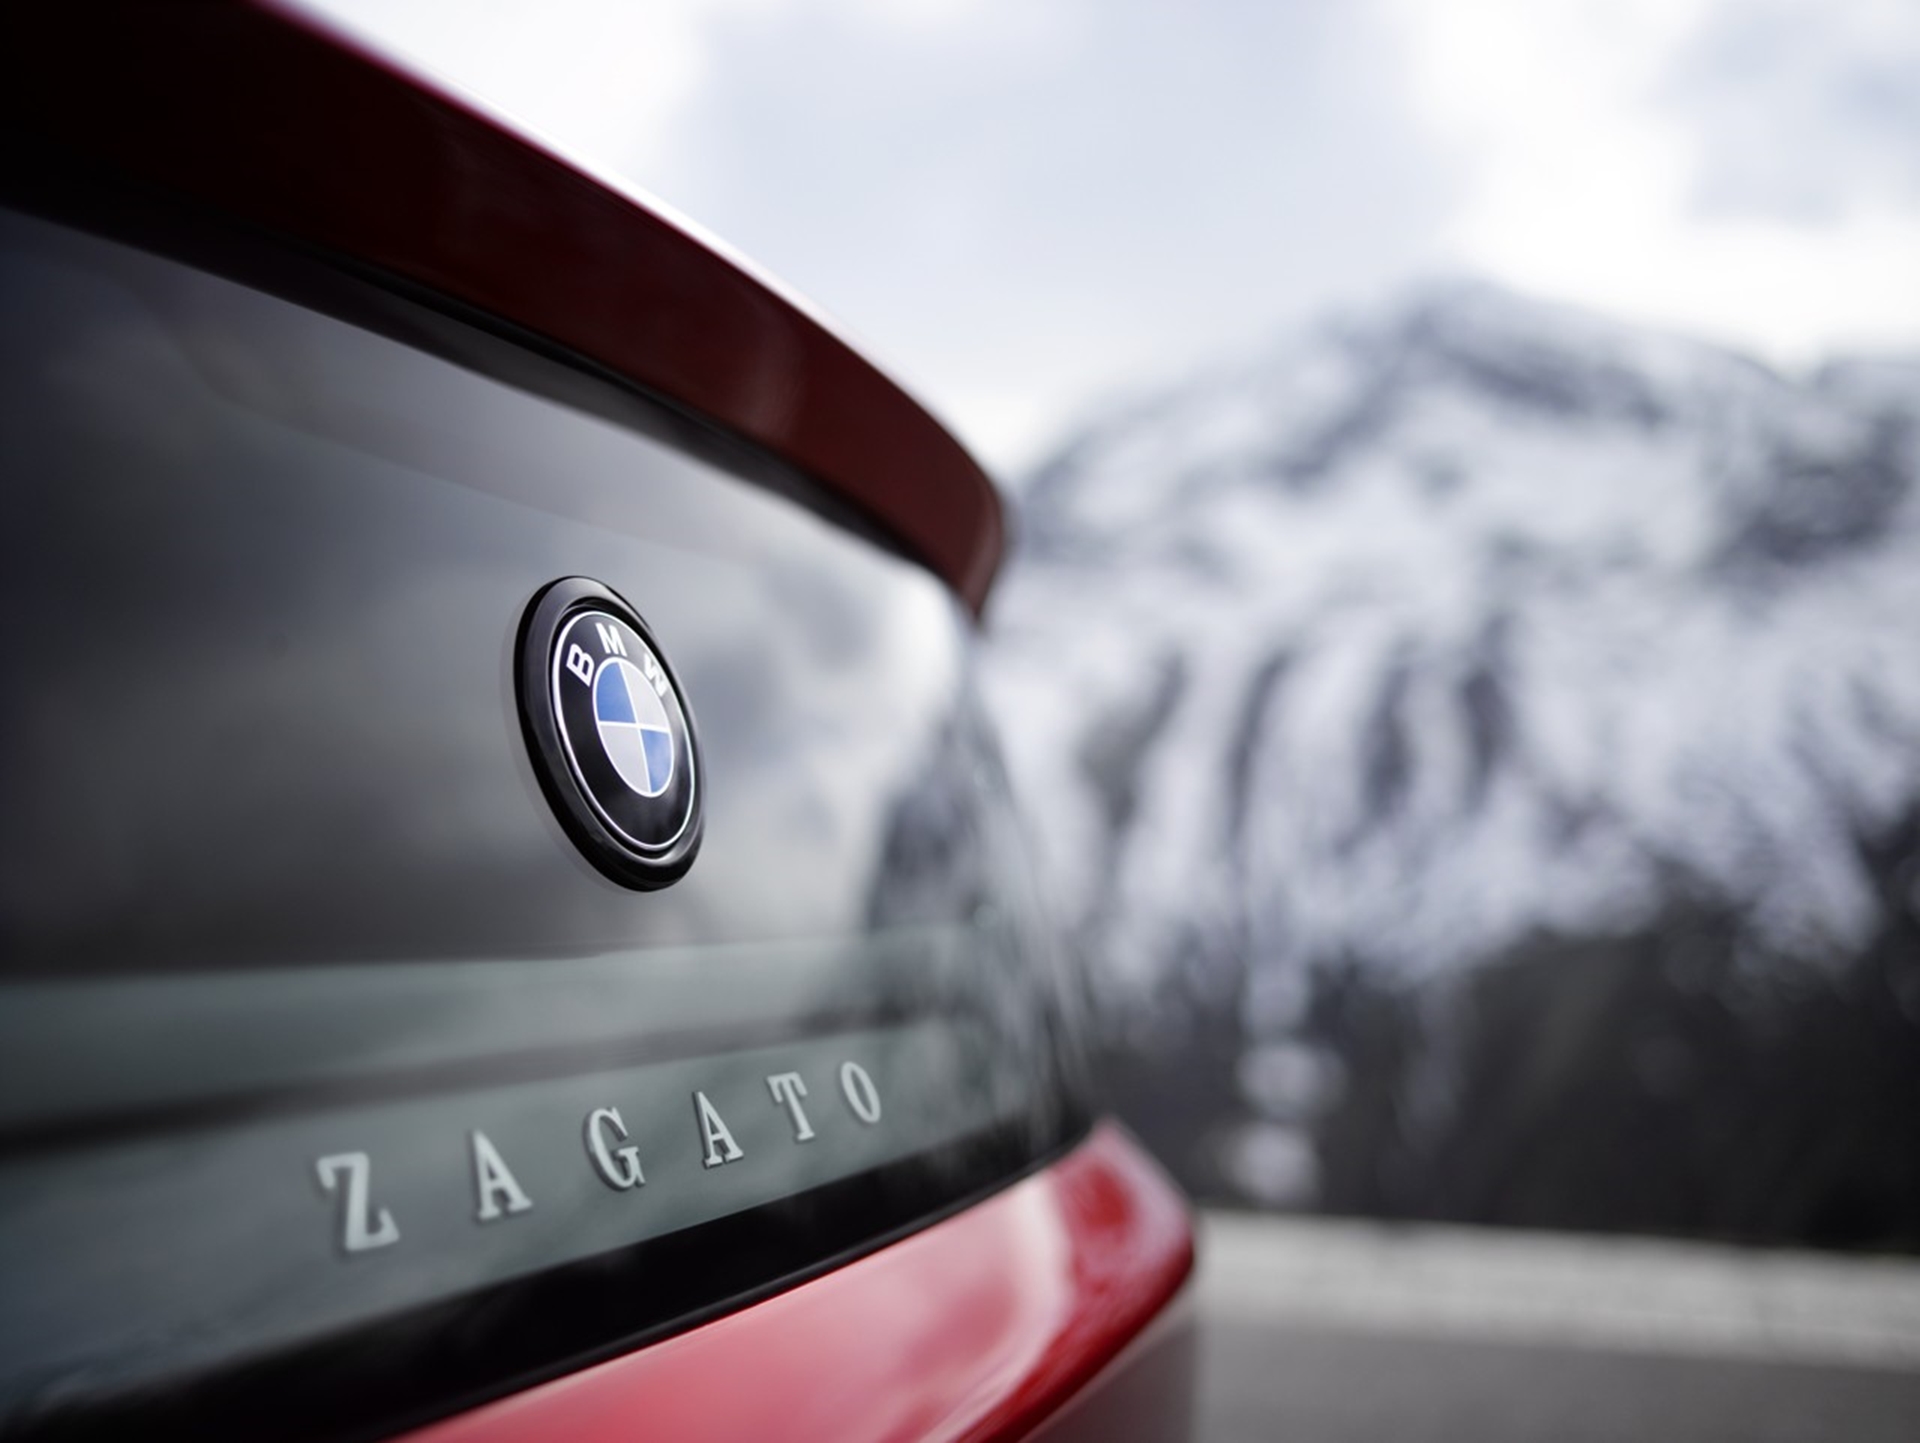 All-New BMW Zagato Makes World Debut at 2012 Pebble Beach Concours